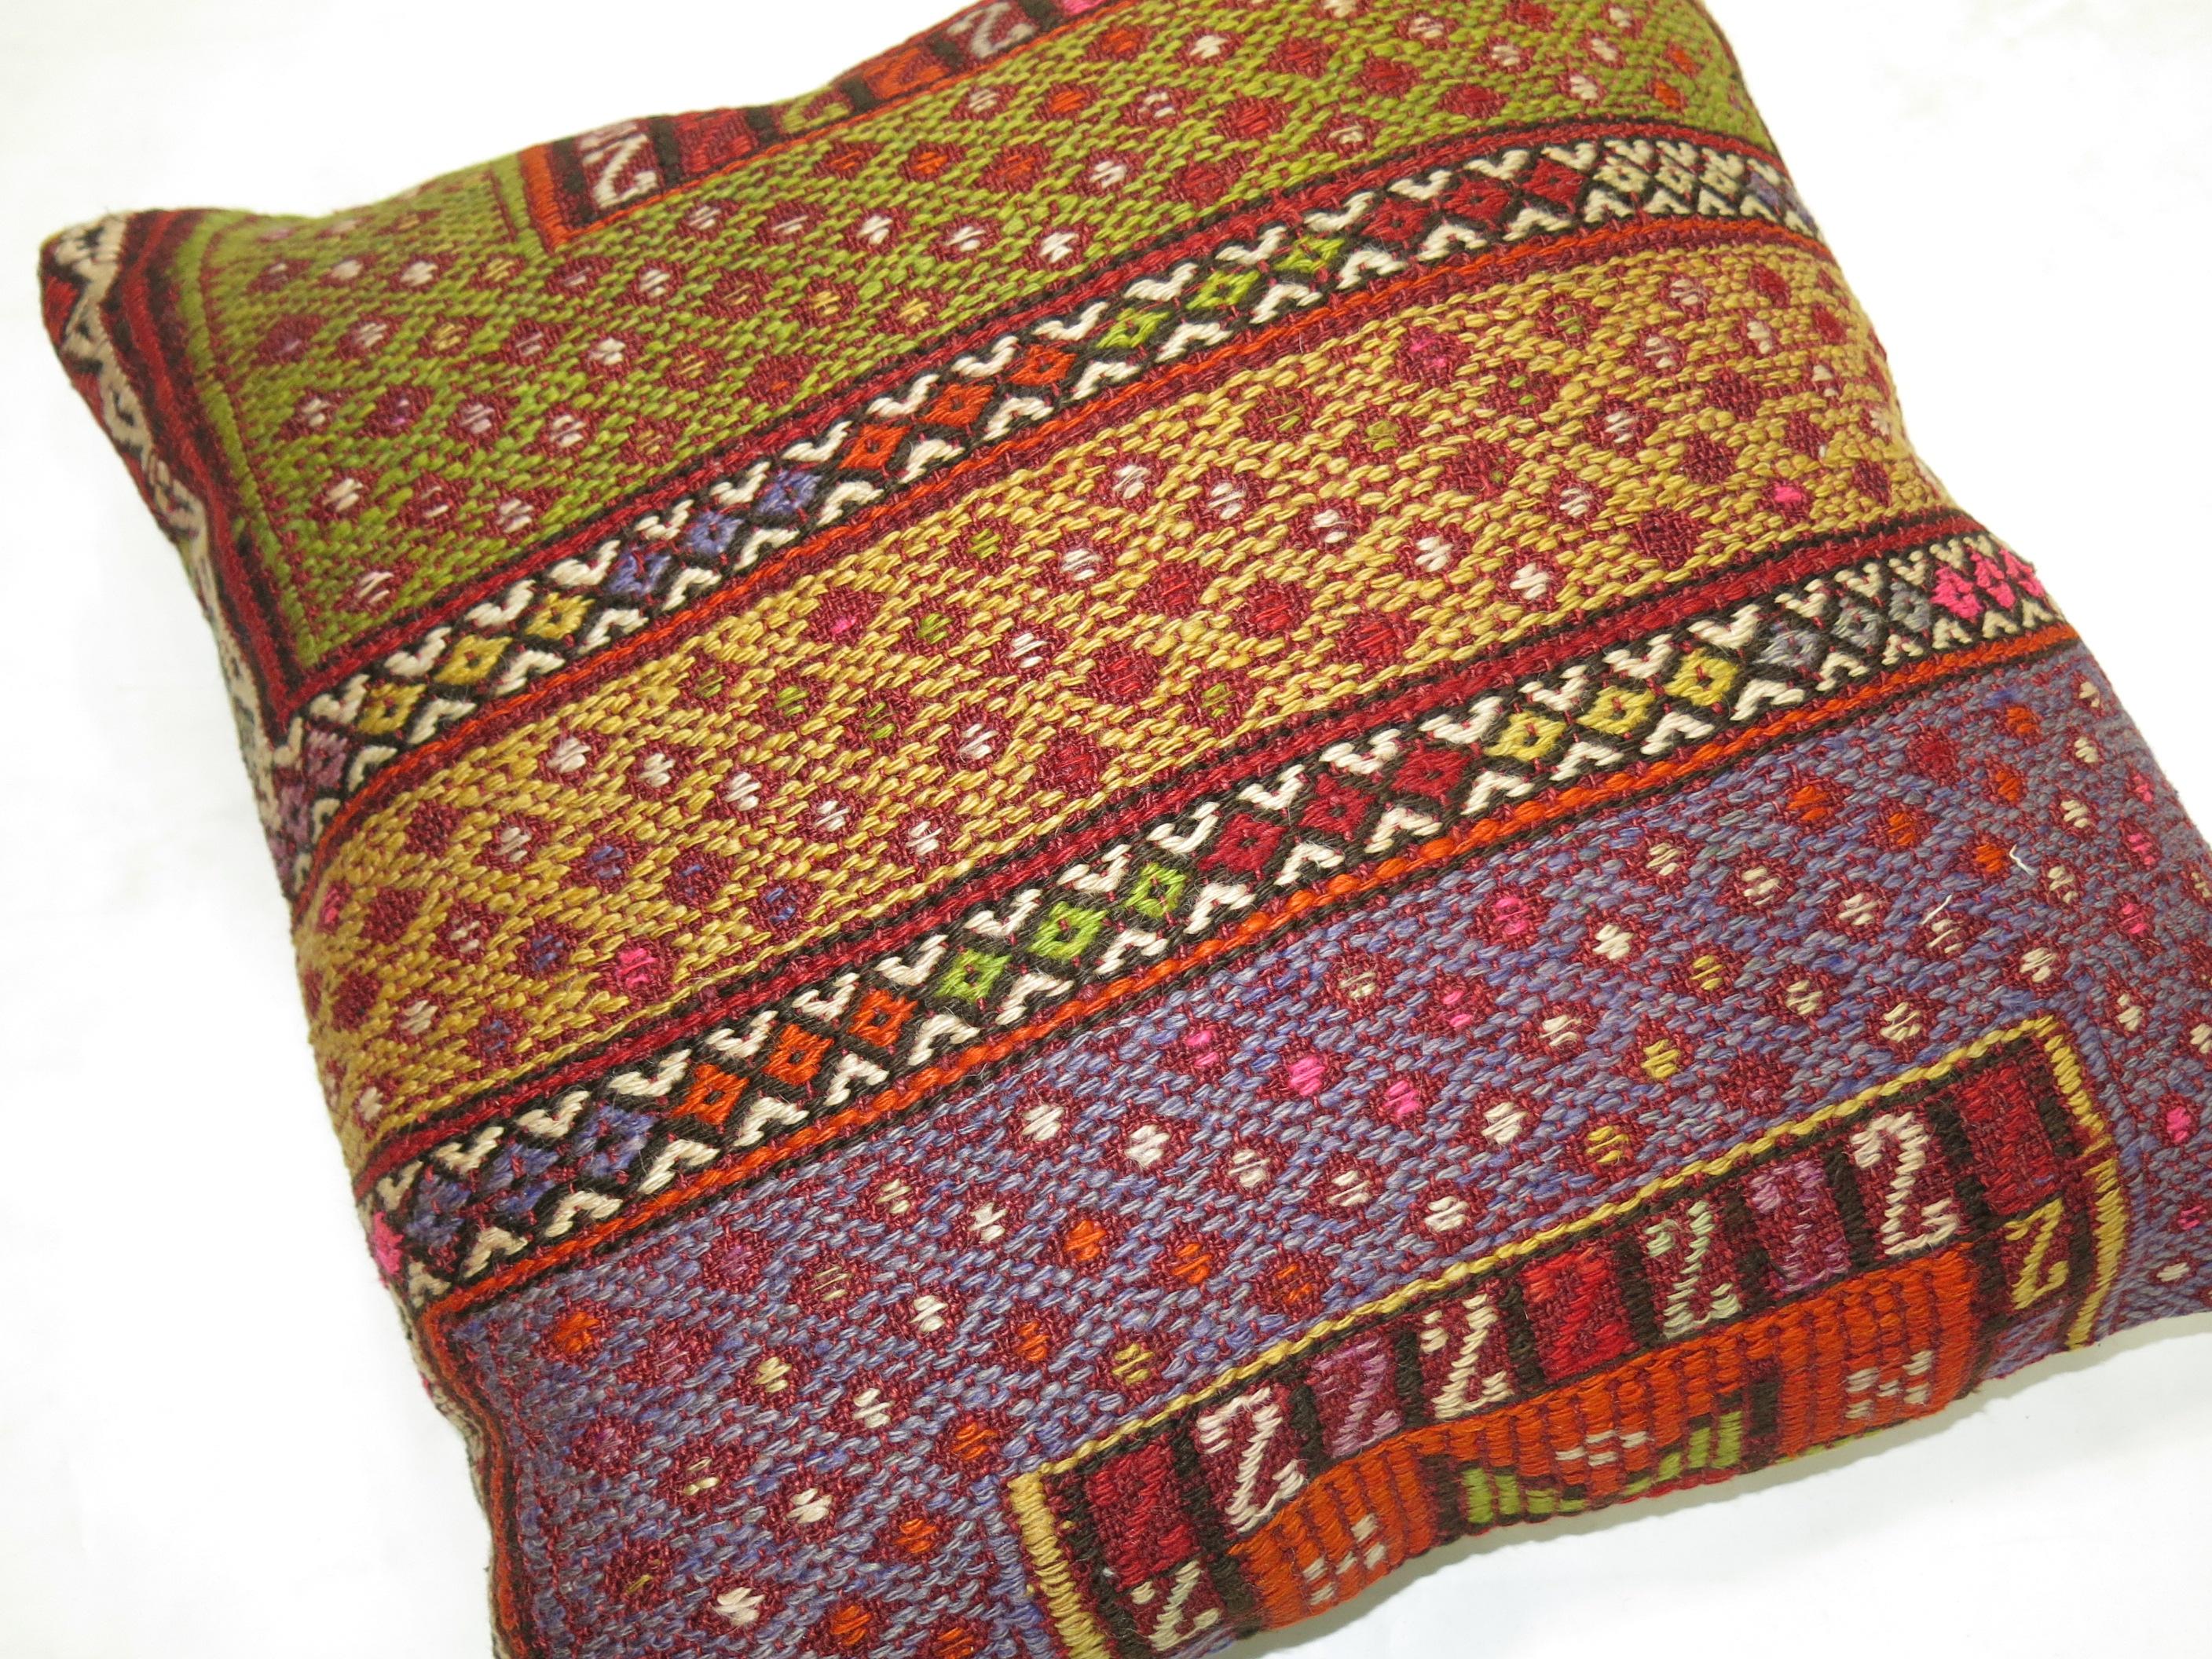 Pillow made from a Moroccan kilim.

19'' x 19''